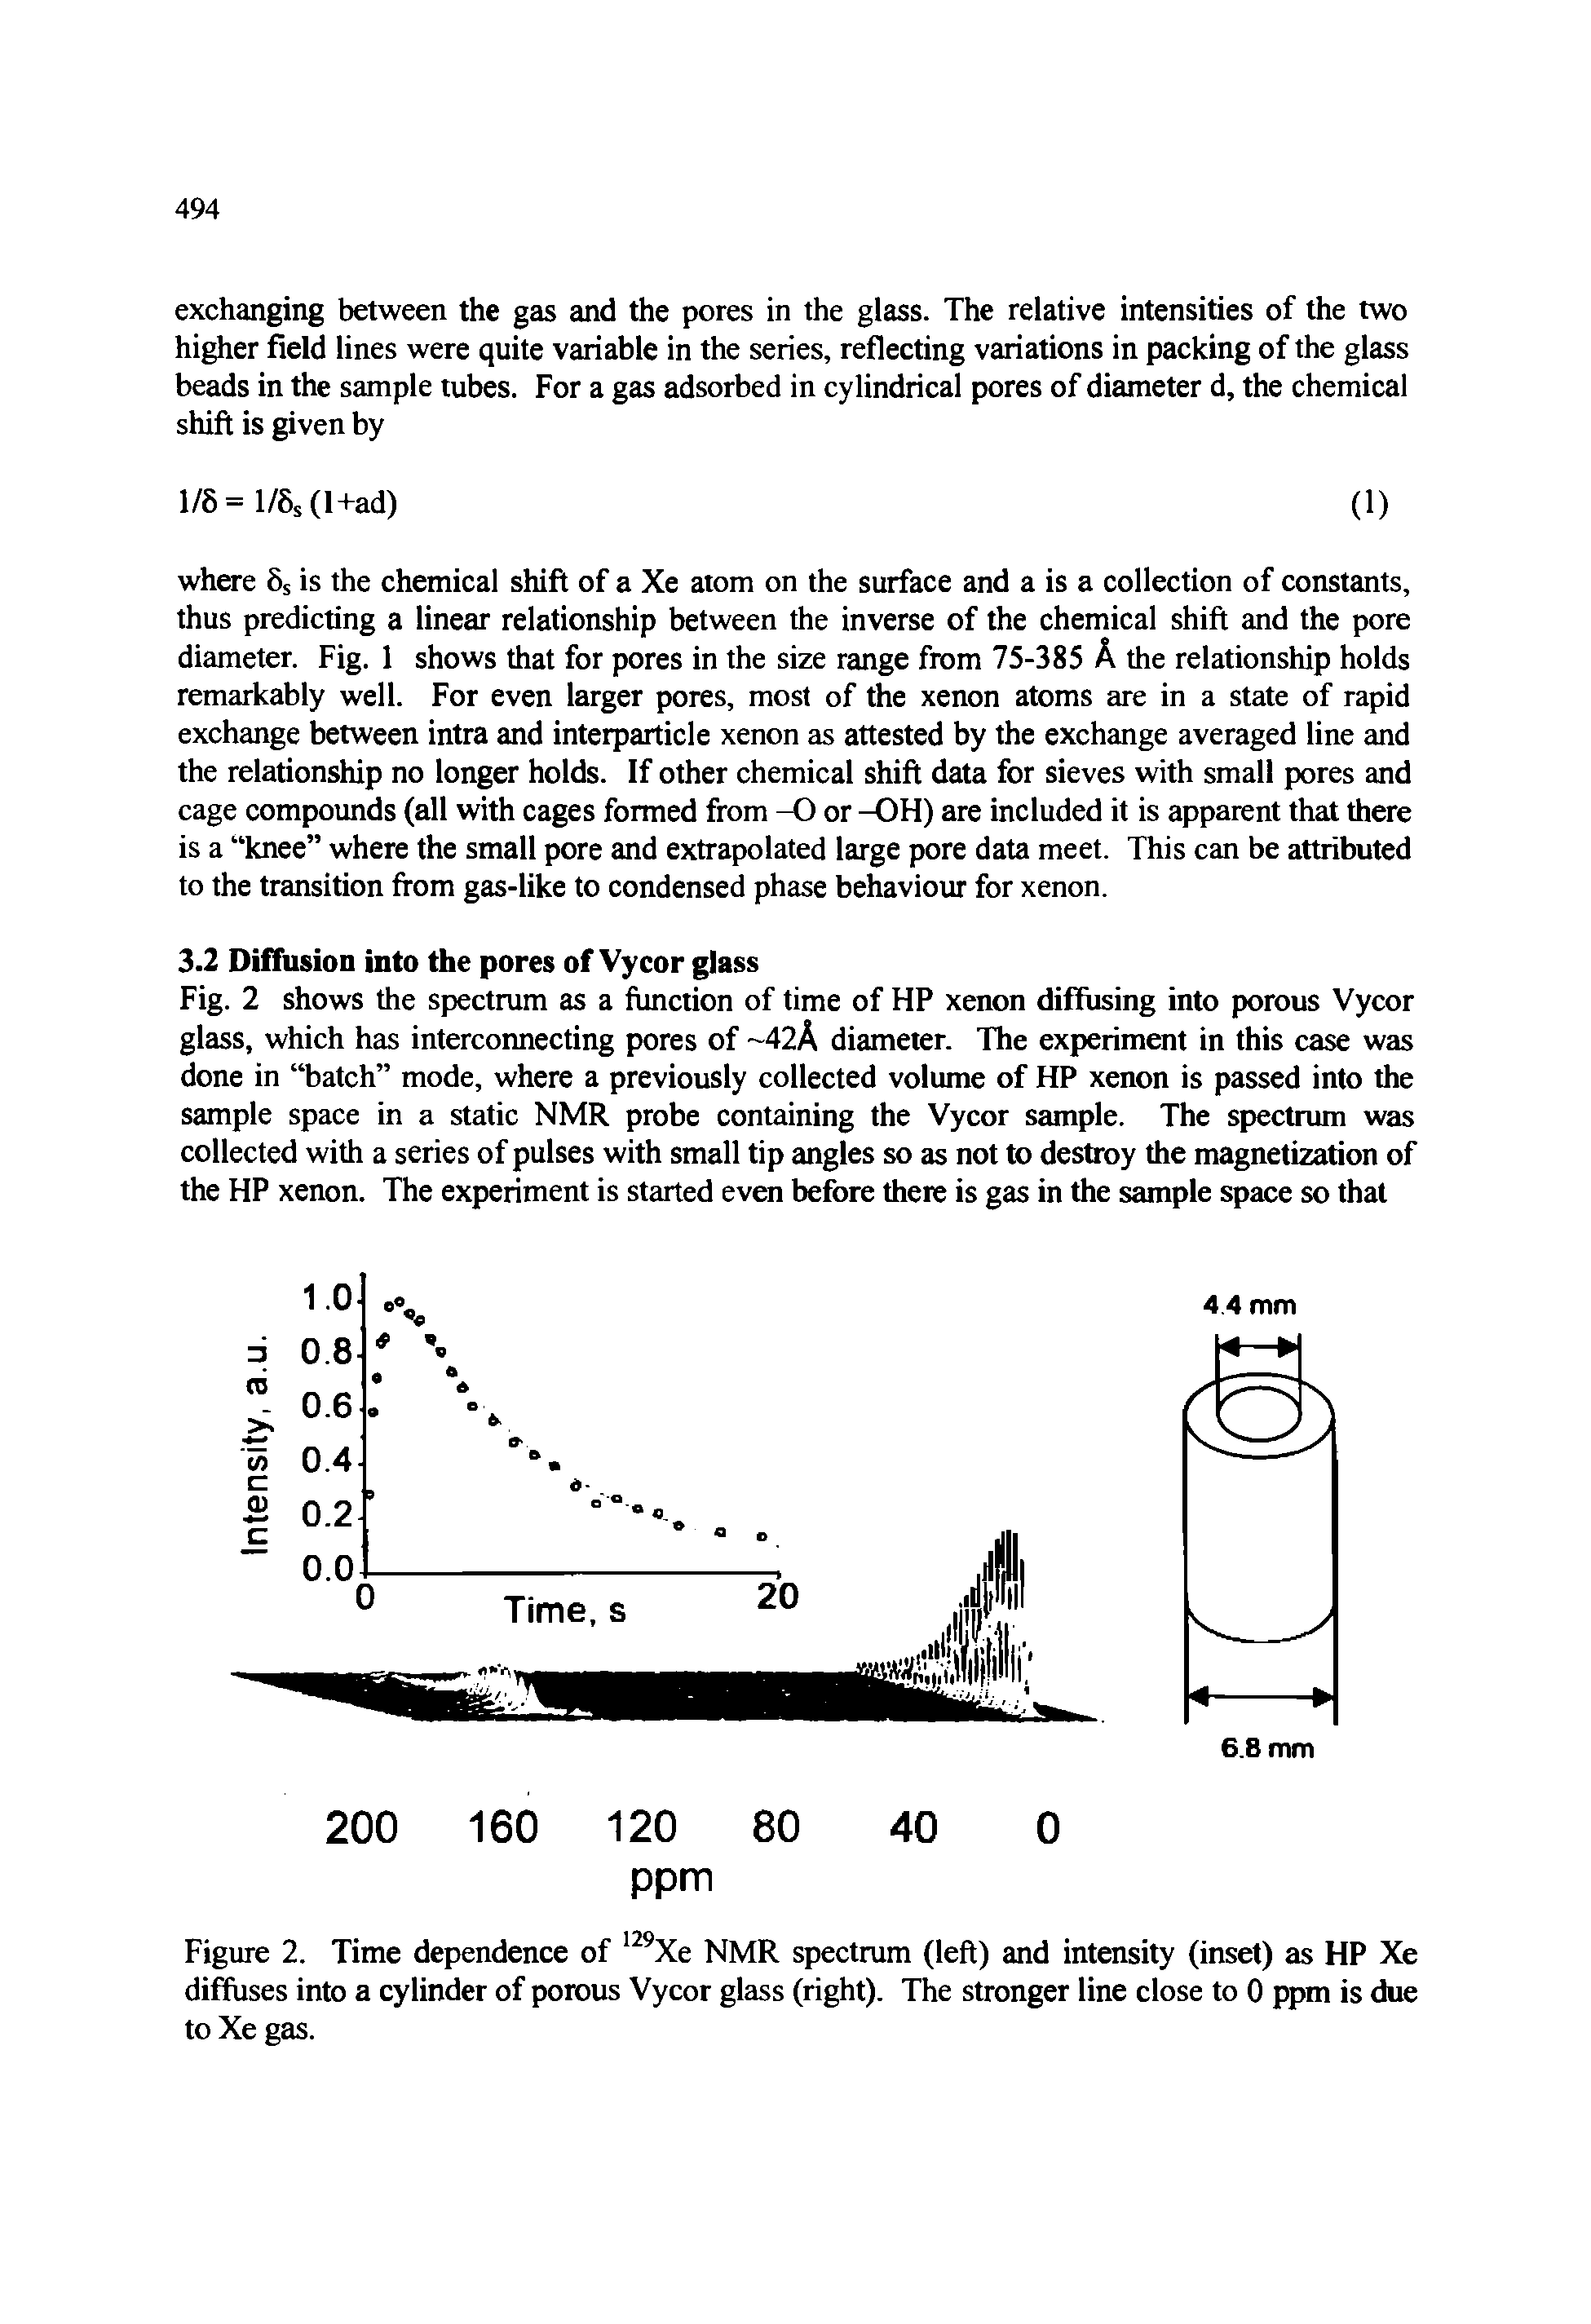 Figure 2. Time dependence of 129Xe NMR spectrum (left) and intensity (inset) as HP Xe diffuses into a cylinder of porous Vycor glass (right). The stronger line close to 0 ppm is due to Xe gas.